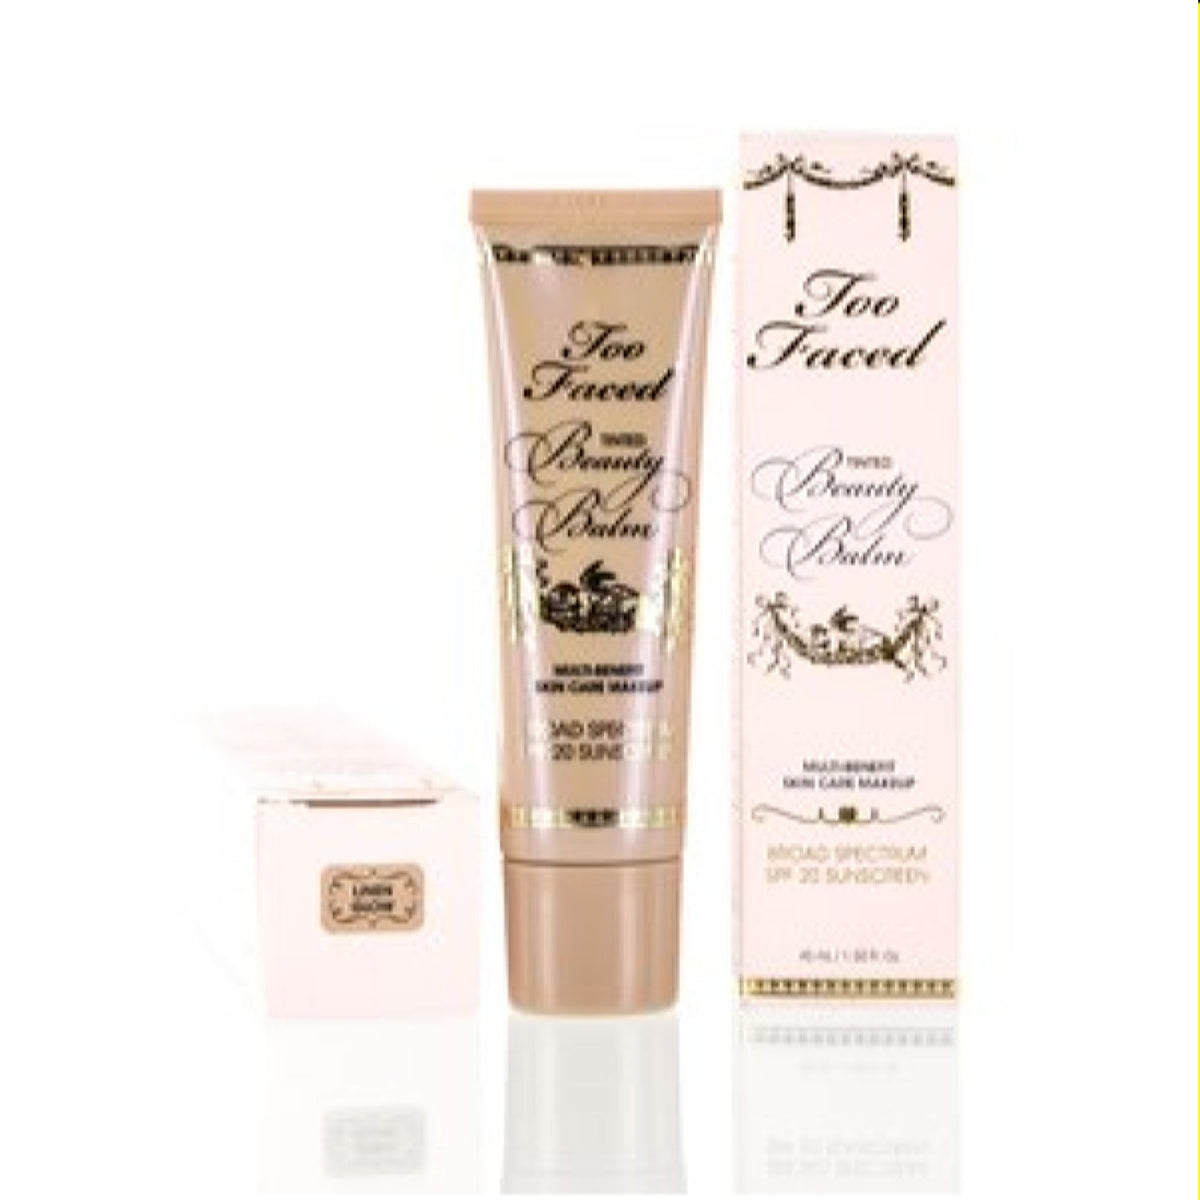 Too Faced Beauty Balm Tinted Cream Foundation Linen Glow 1.5 Oz (45 Ml) NA